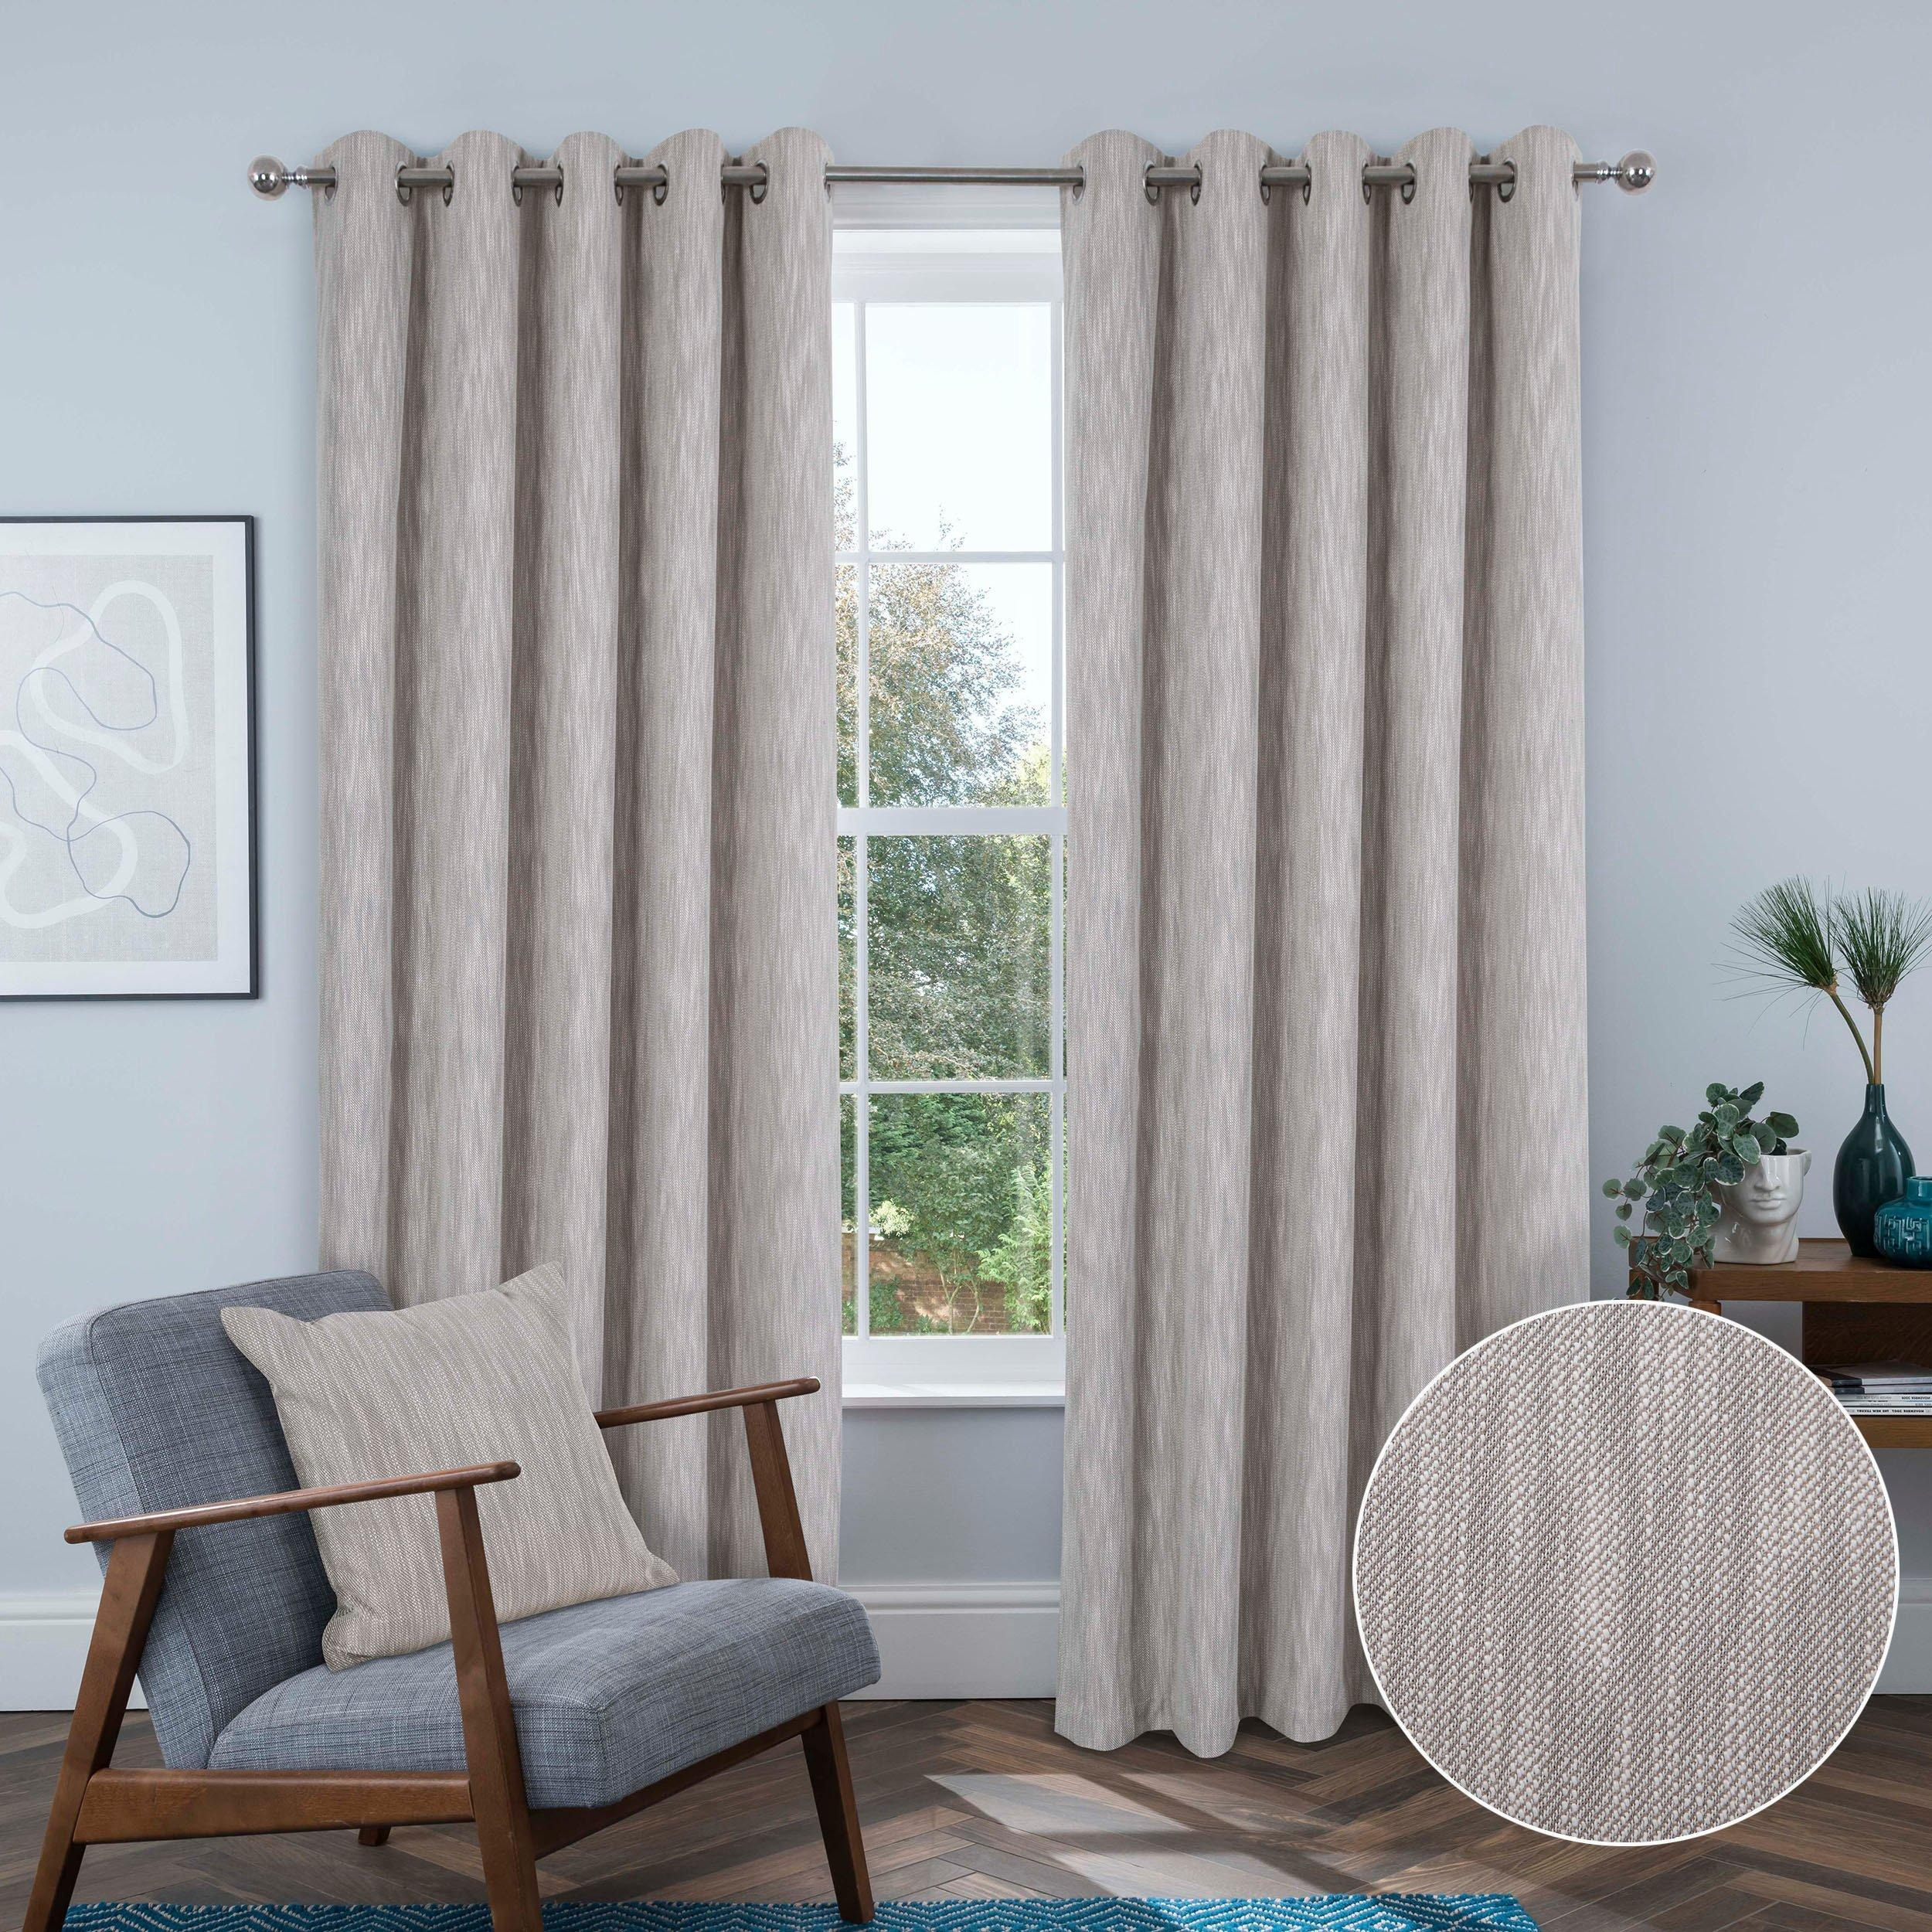 Rossi textured Thermal Blackout Lined Eyelet curtains pair - image 1